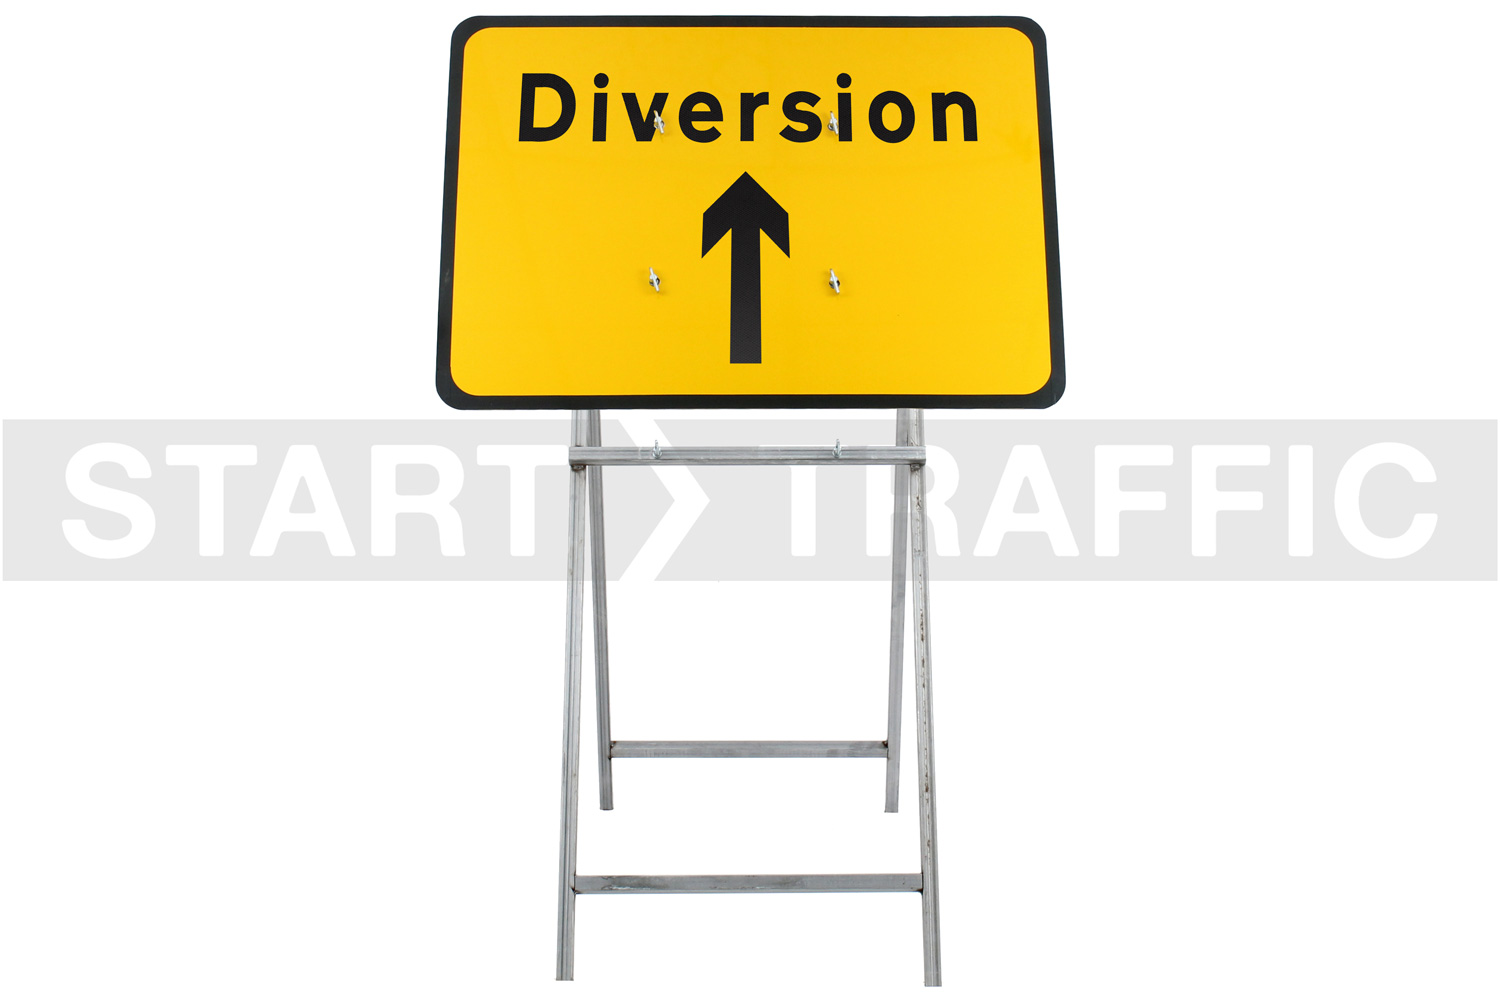 Diversion Straight Ahead Sign Mounted on Quick Fit Mini Frame